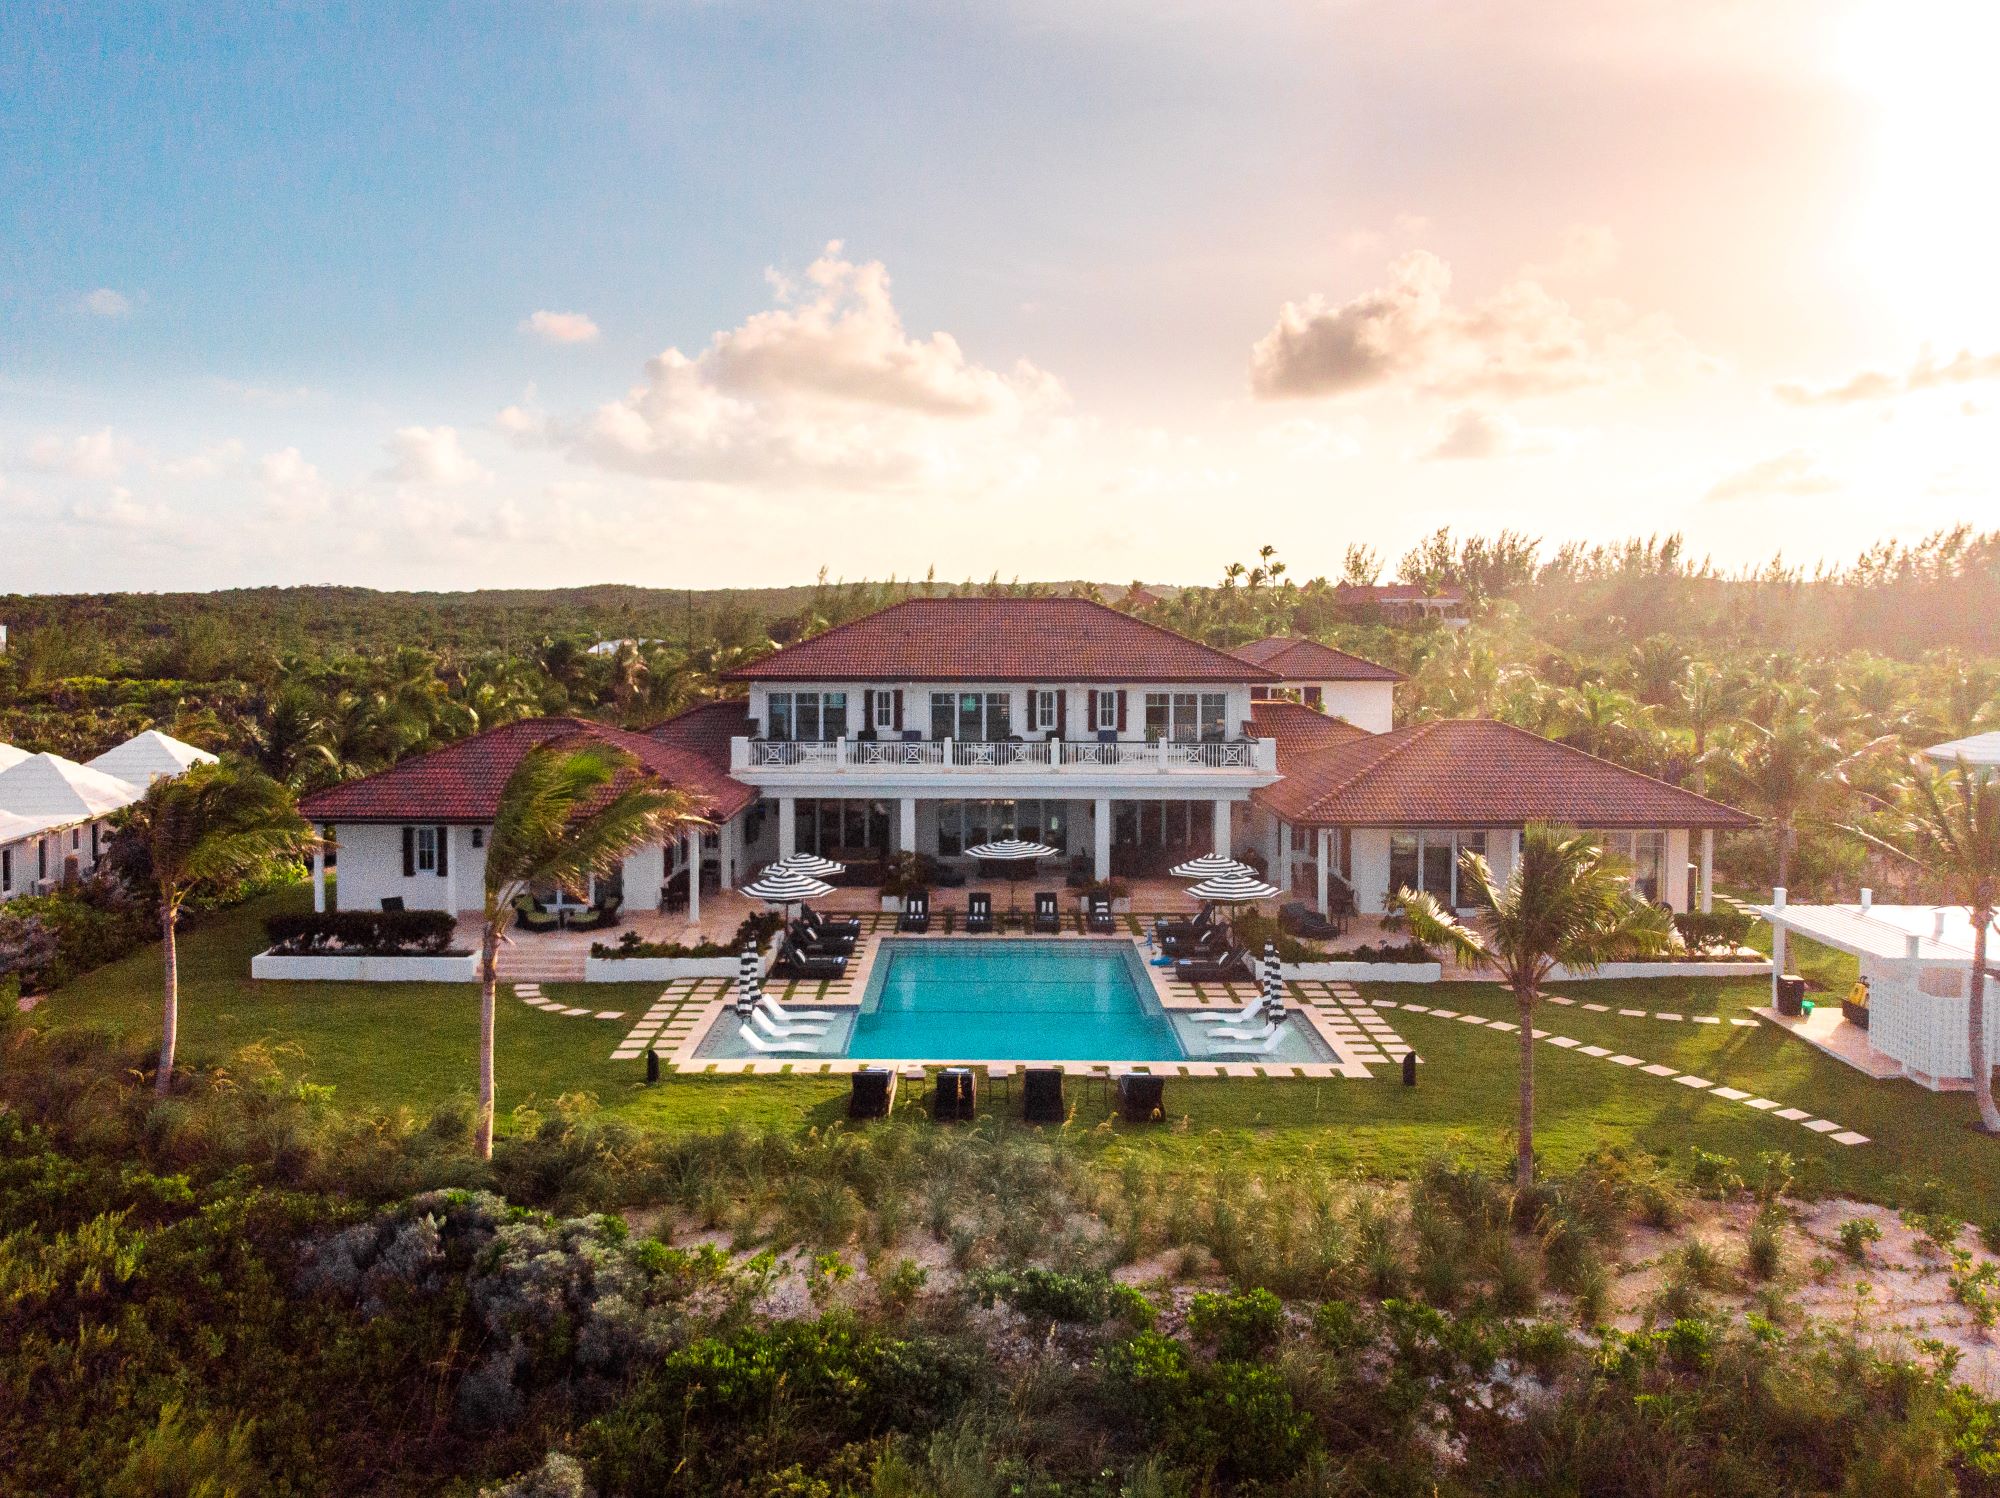 Bahamian Paradise Found: Snaresbrook Manor an Impeccable Luxury Escape in Eleuthera